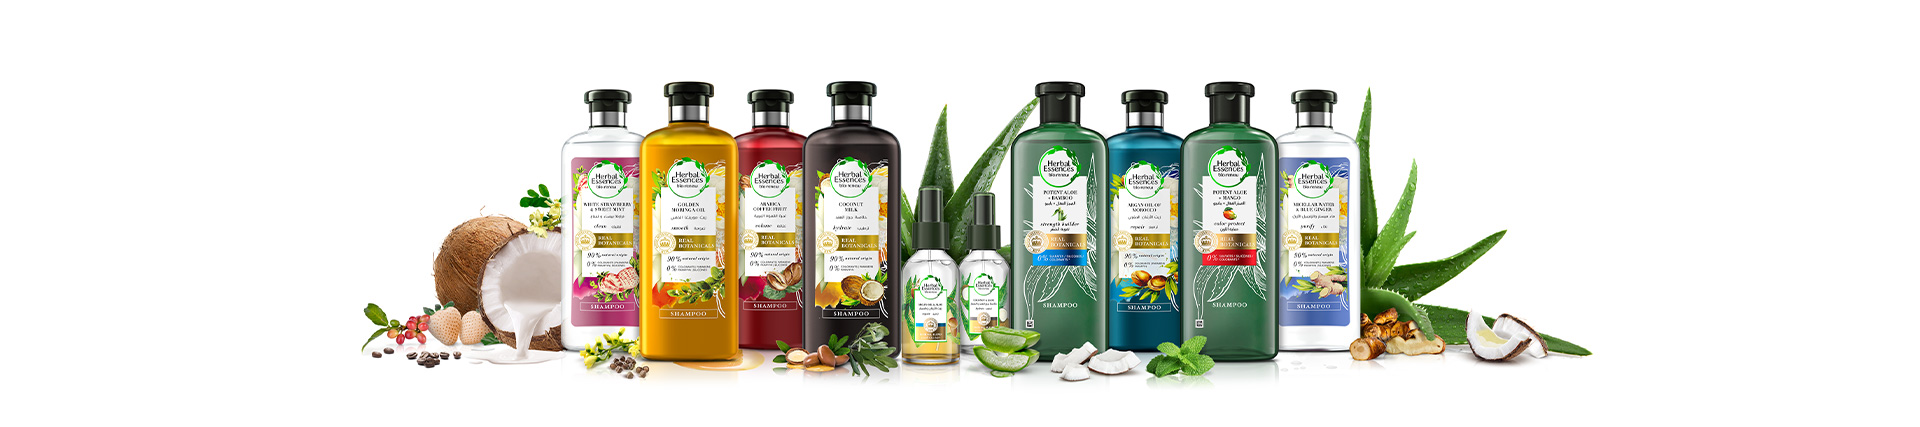 Bottles of Herbal Essences shampoo and conditioners top collections